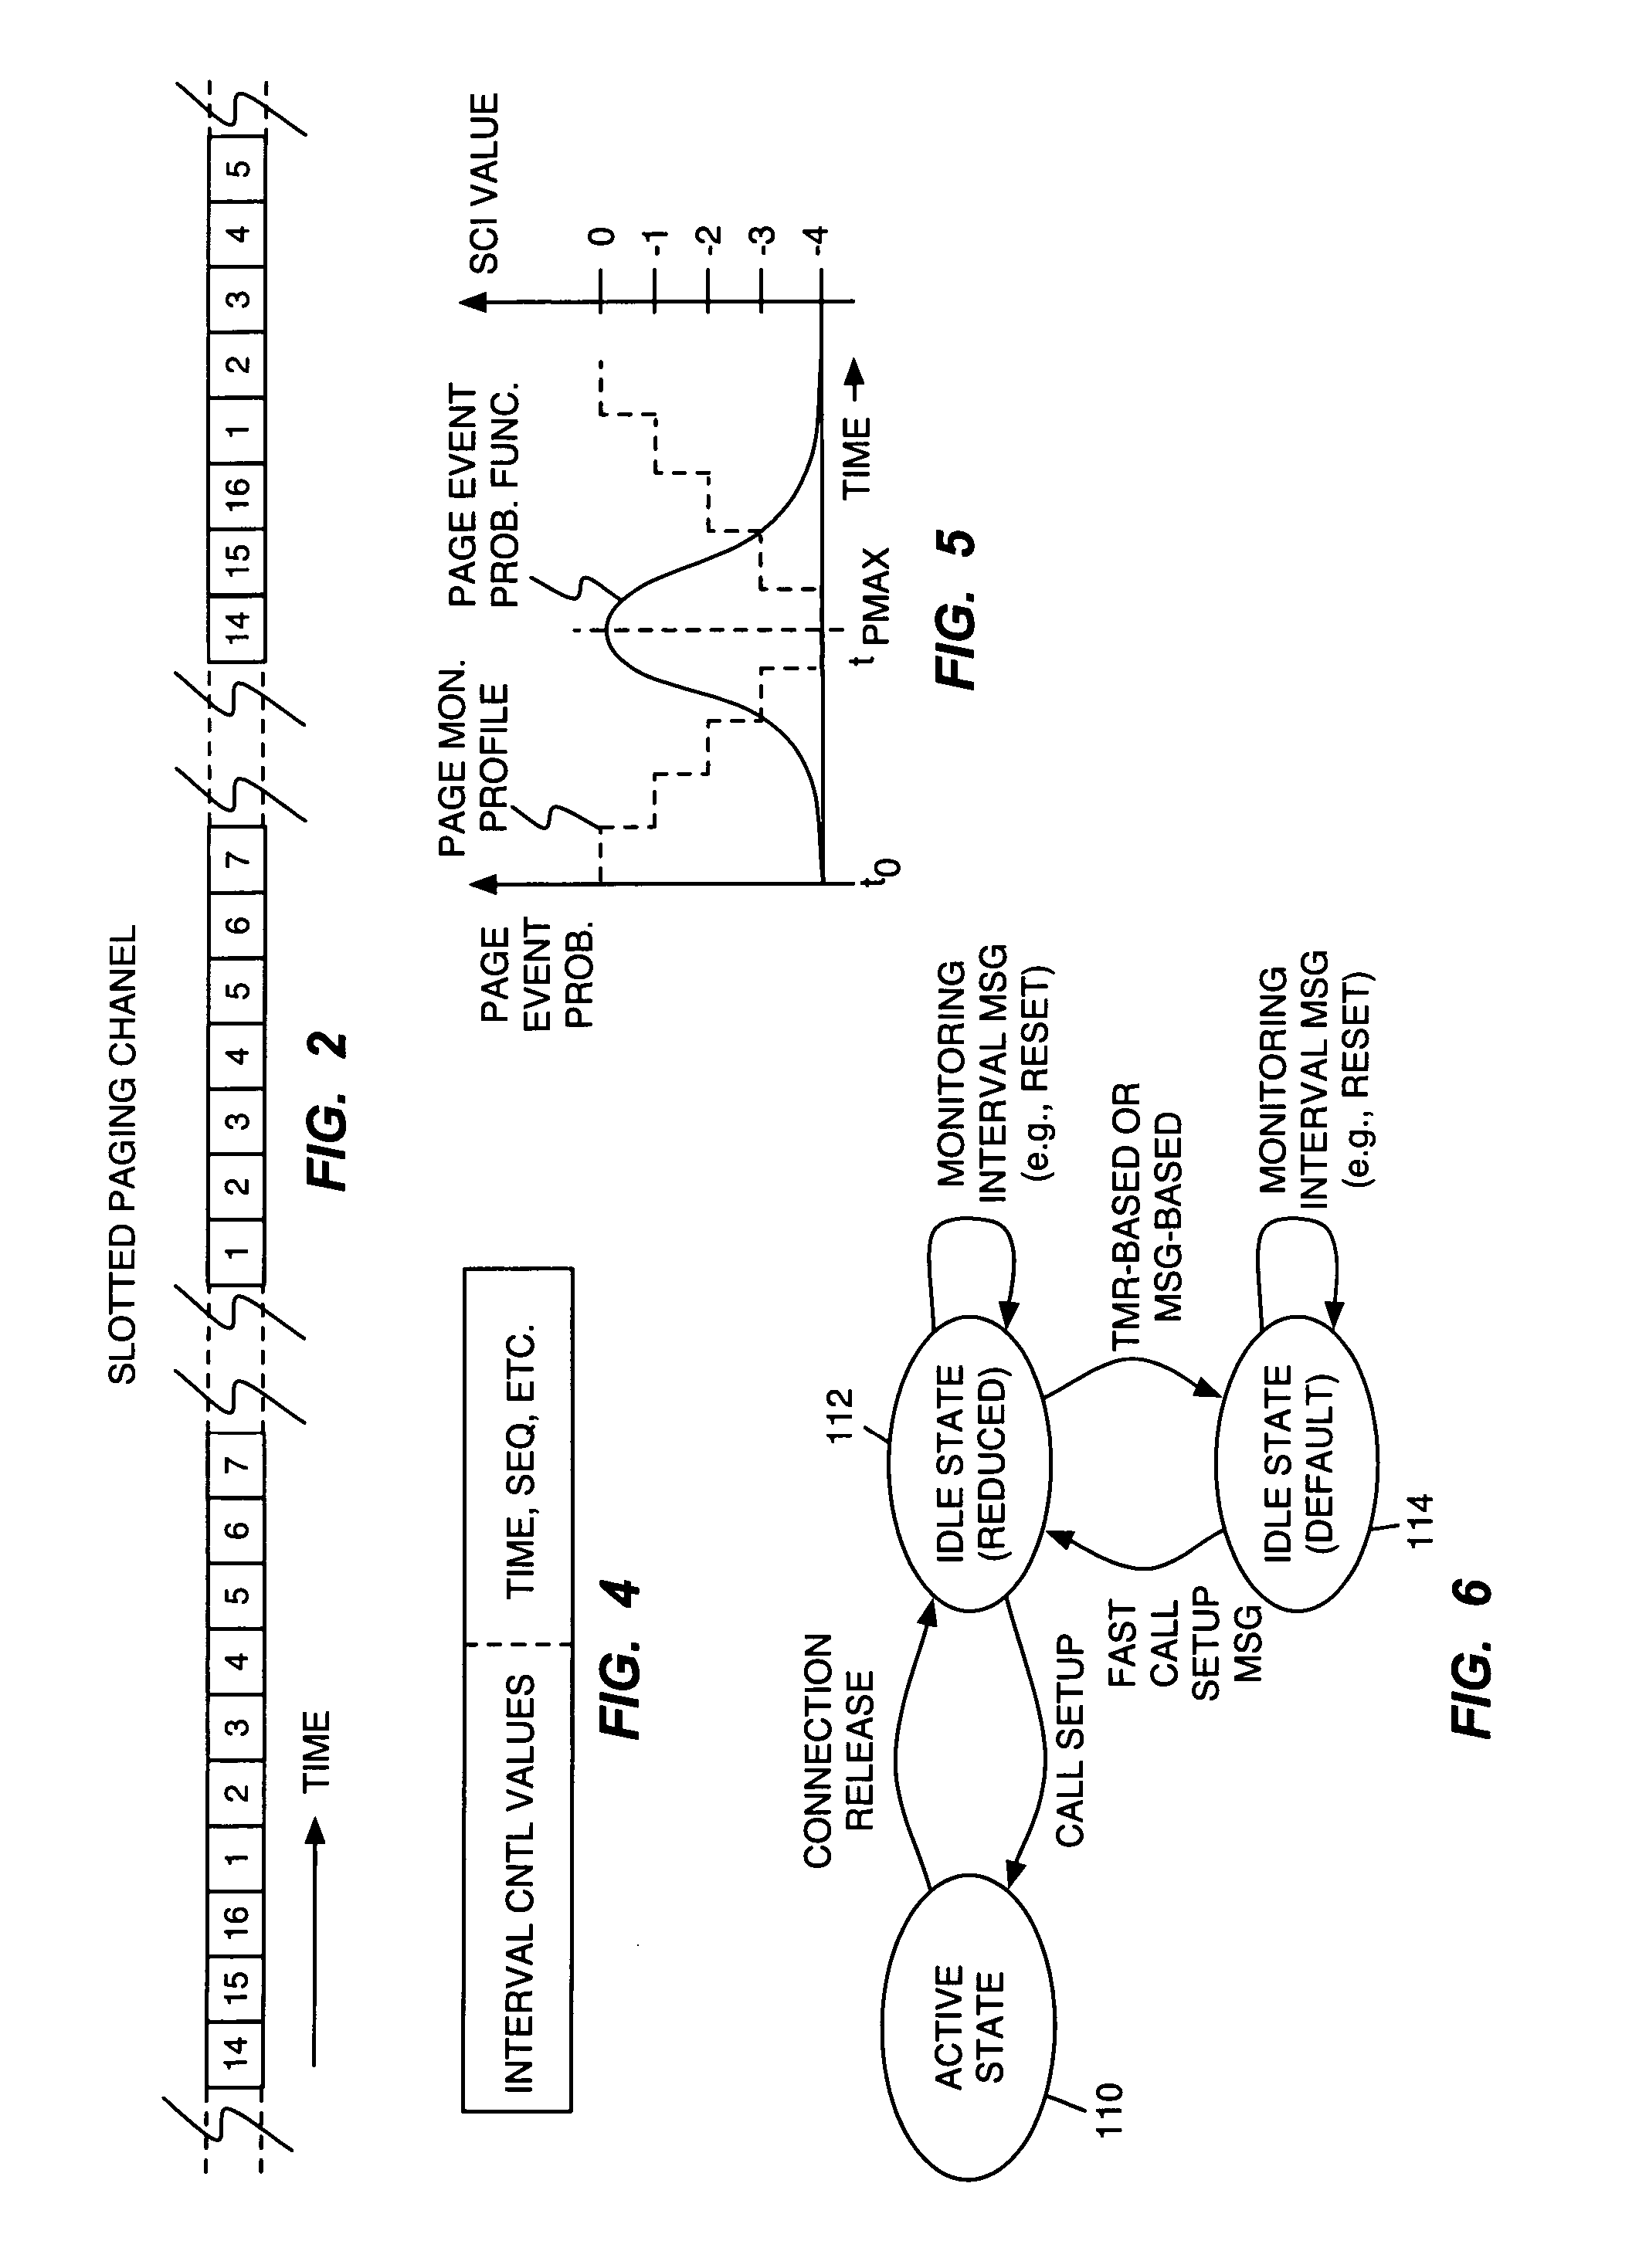 Method and apparatus for controlling paging delays of mobile stations in a wireless communication network